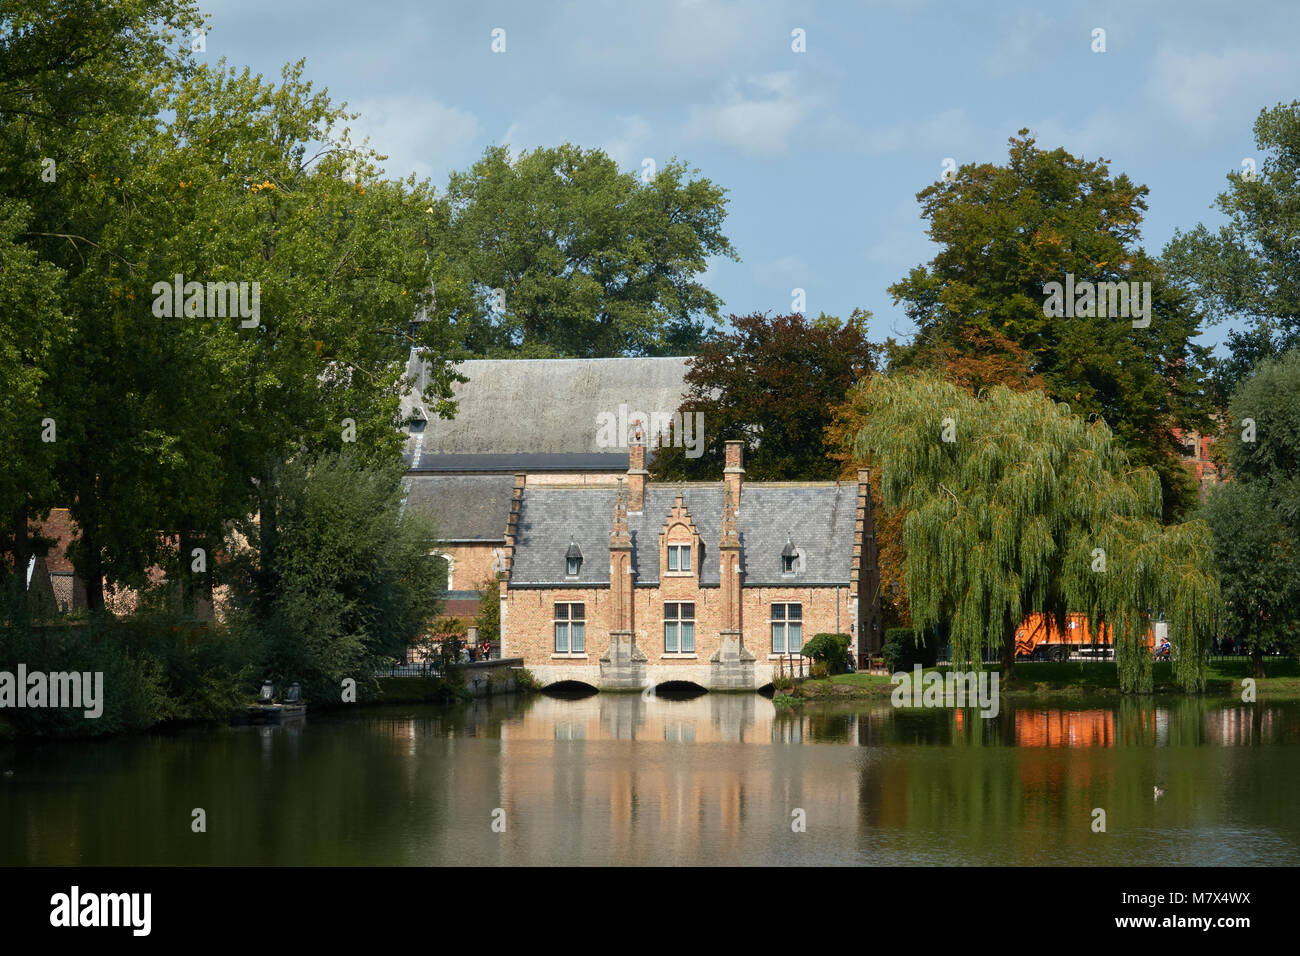 Dream home by the lake. Popular tourist town of Bruges in Belgium. Stock Photo